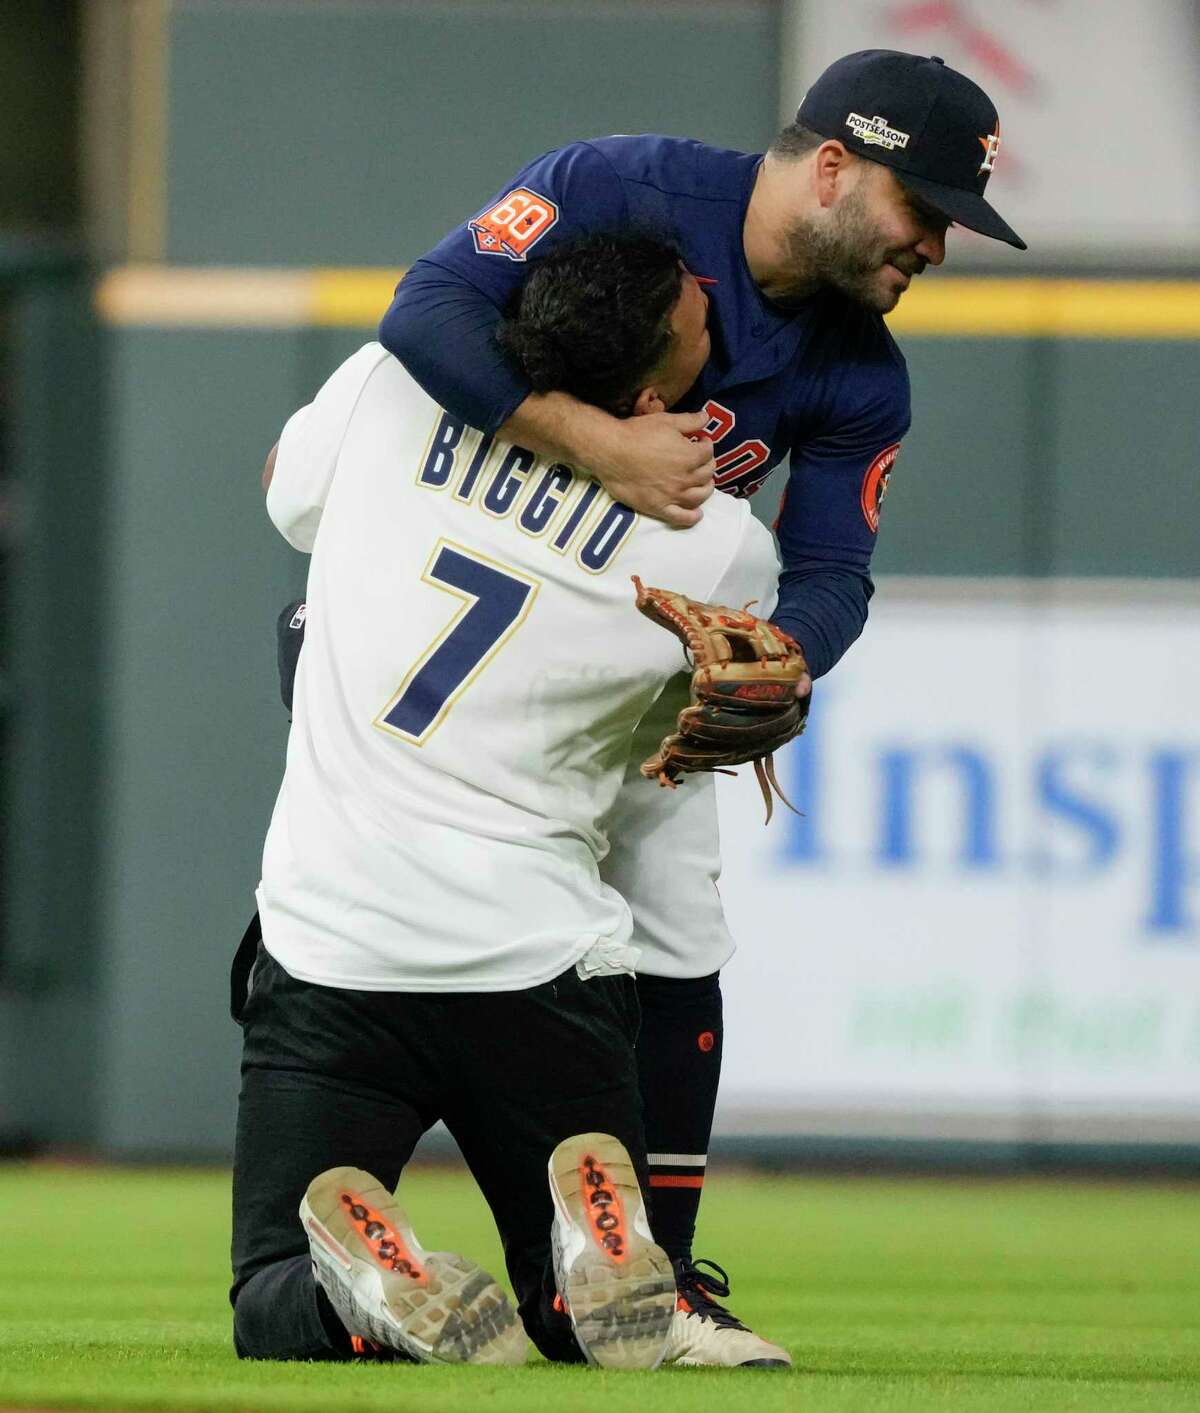 Altuve engages with fan who rushed field for selfie in ALCS